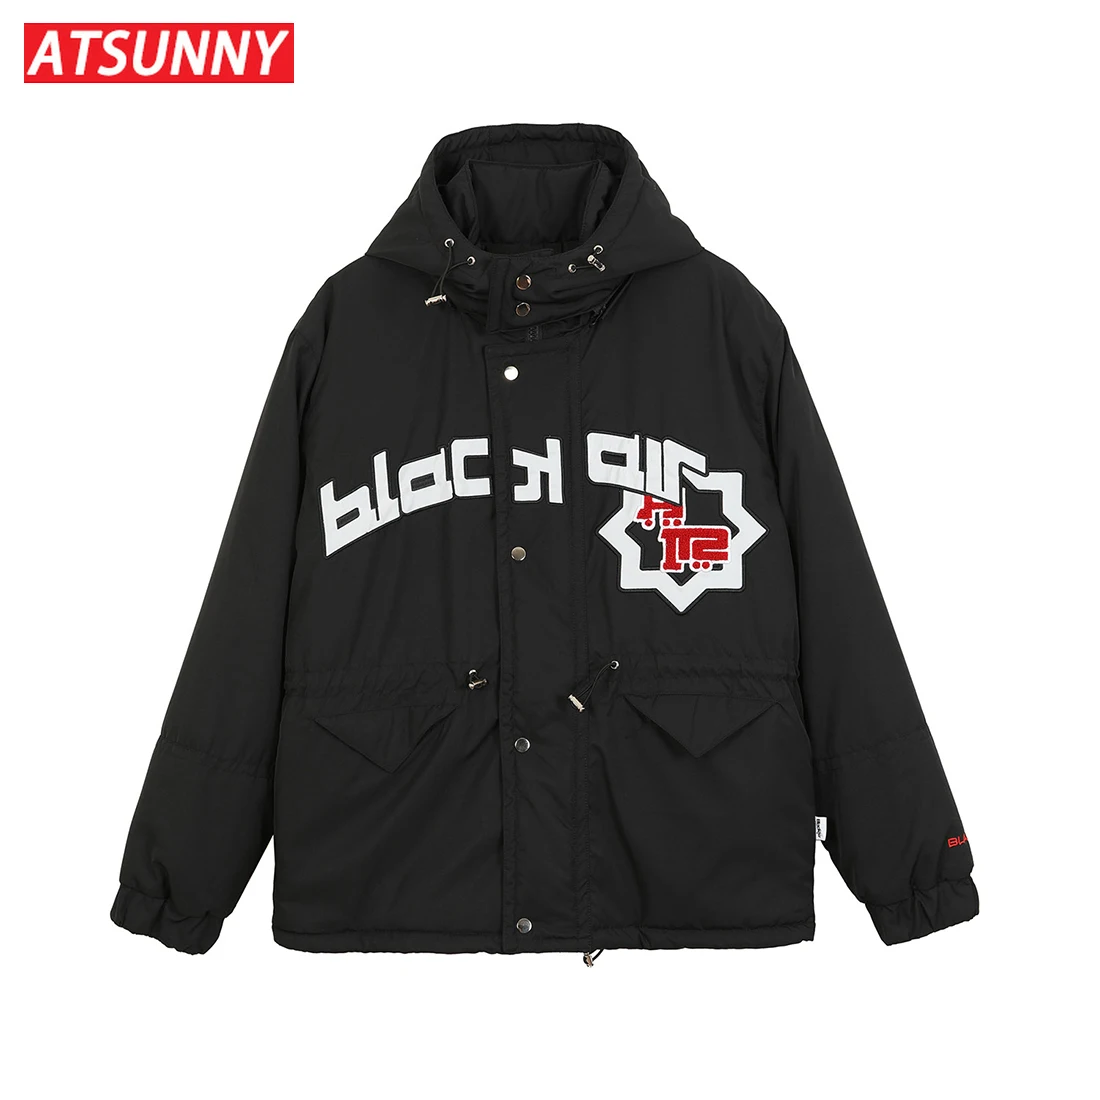 ATSUNNY Fashion Harajuku Parkas Oversize Men Casual Thicken with Cotton Jackt Autumn and Winter Clothes Streetwear Winter Coat